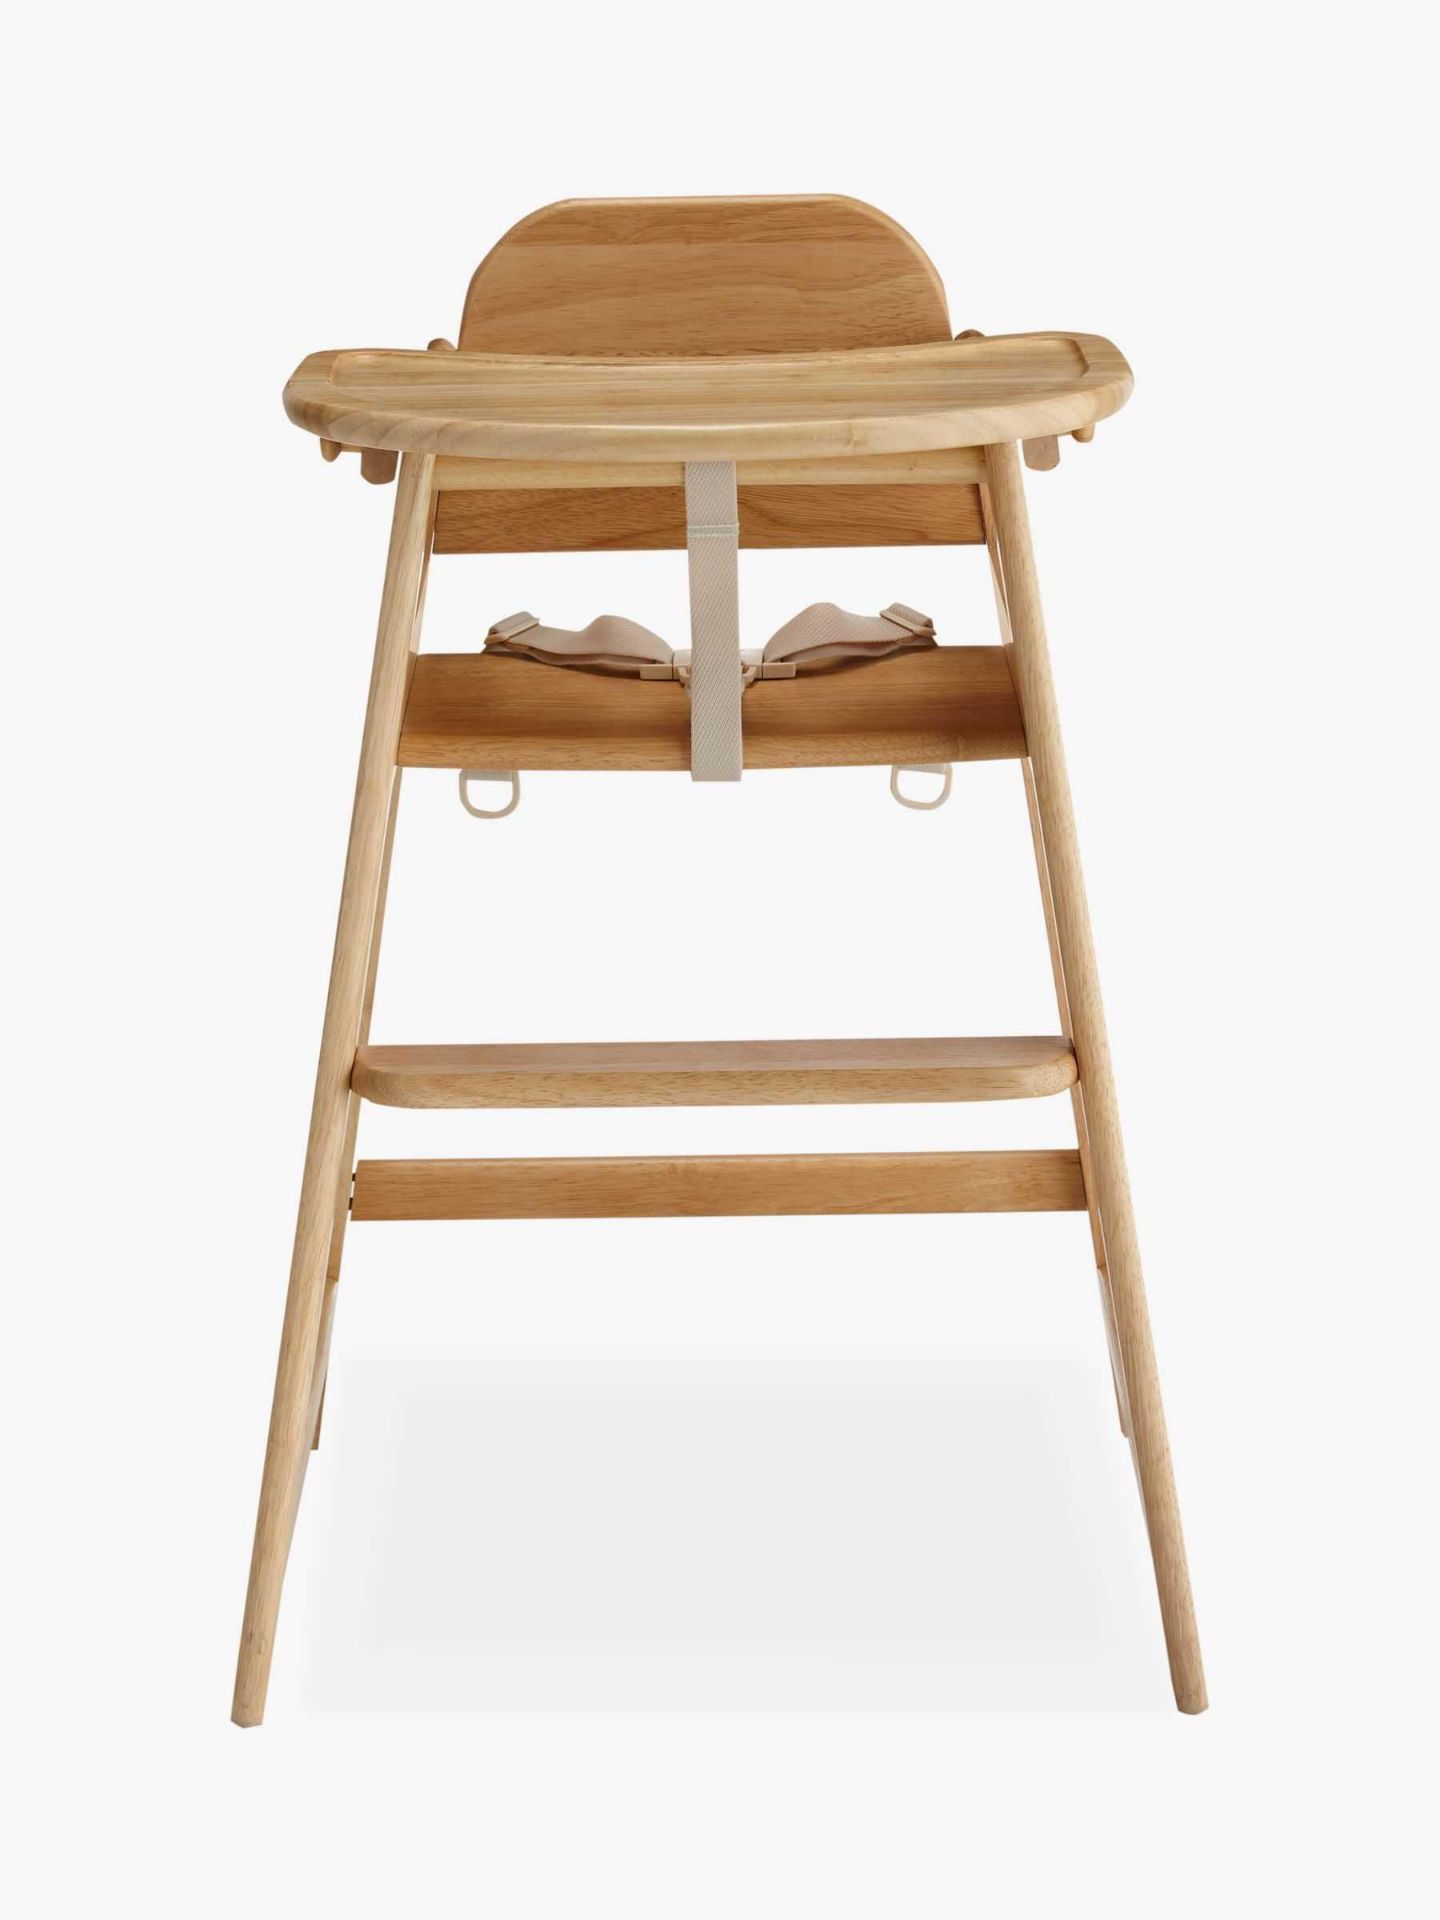 (Jb) RRP £85 Lot To Contain 1 Boxed John Lewis And Partners Leckford High Chair (No Tag)